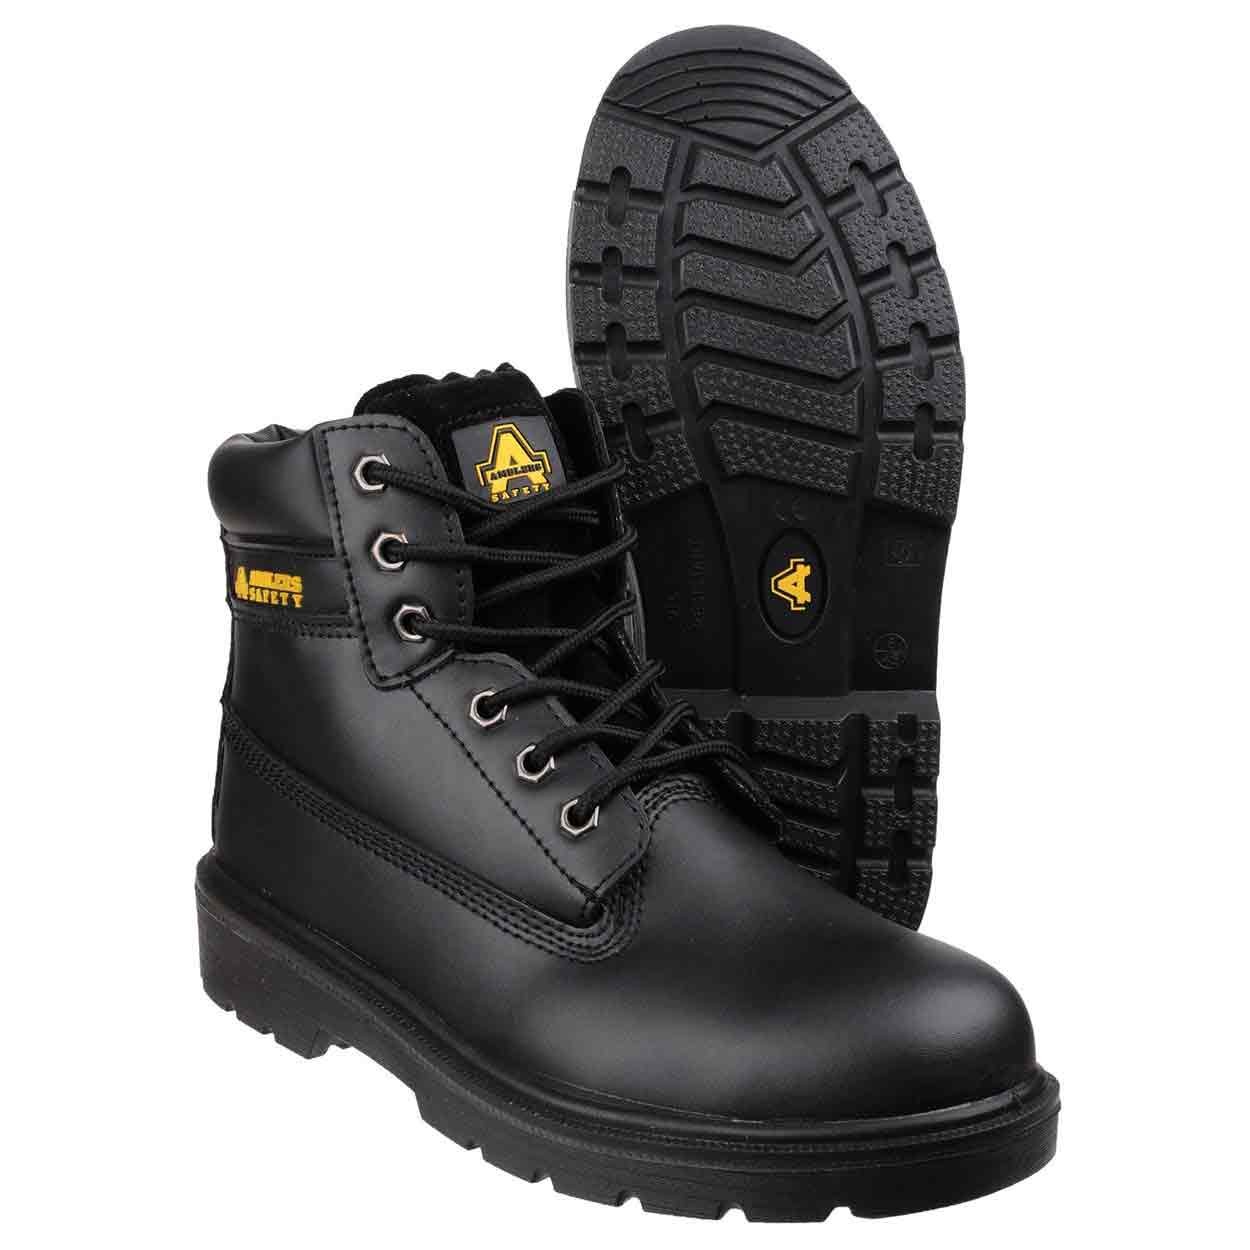 Amblers Safety FS112 - Standard Safety Boots - Mens Safety Boots & Shoes -  Safety Footwear - Best Workwear